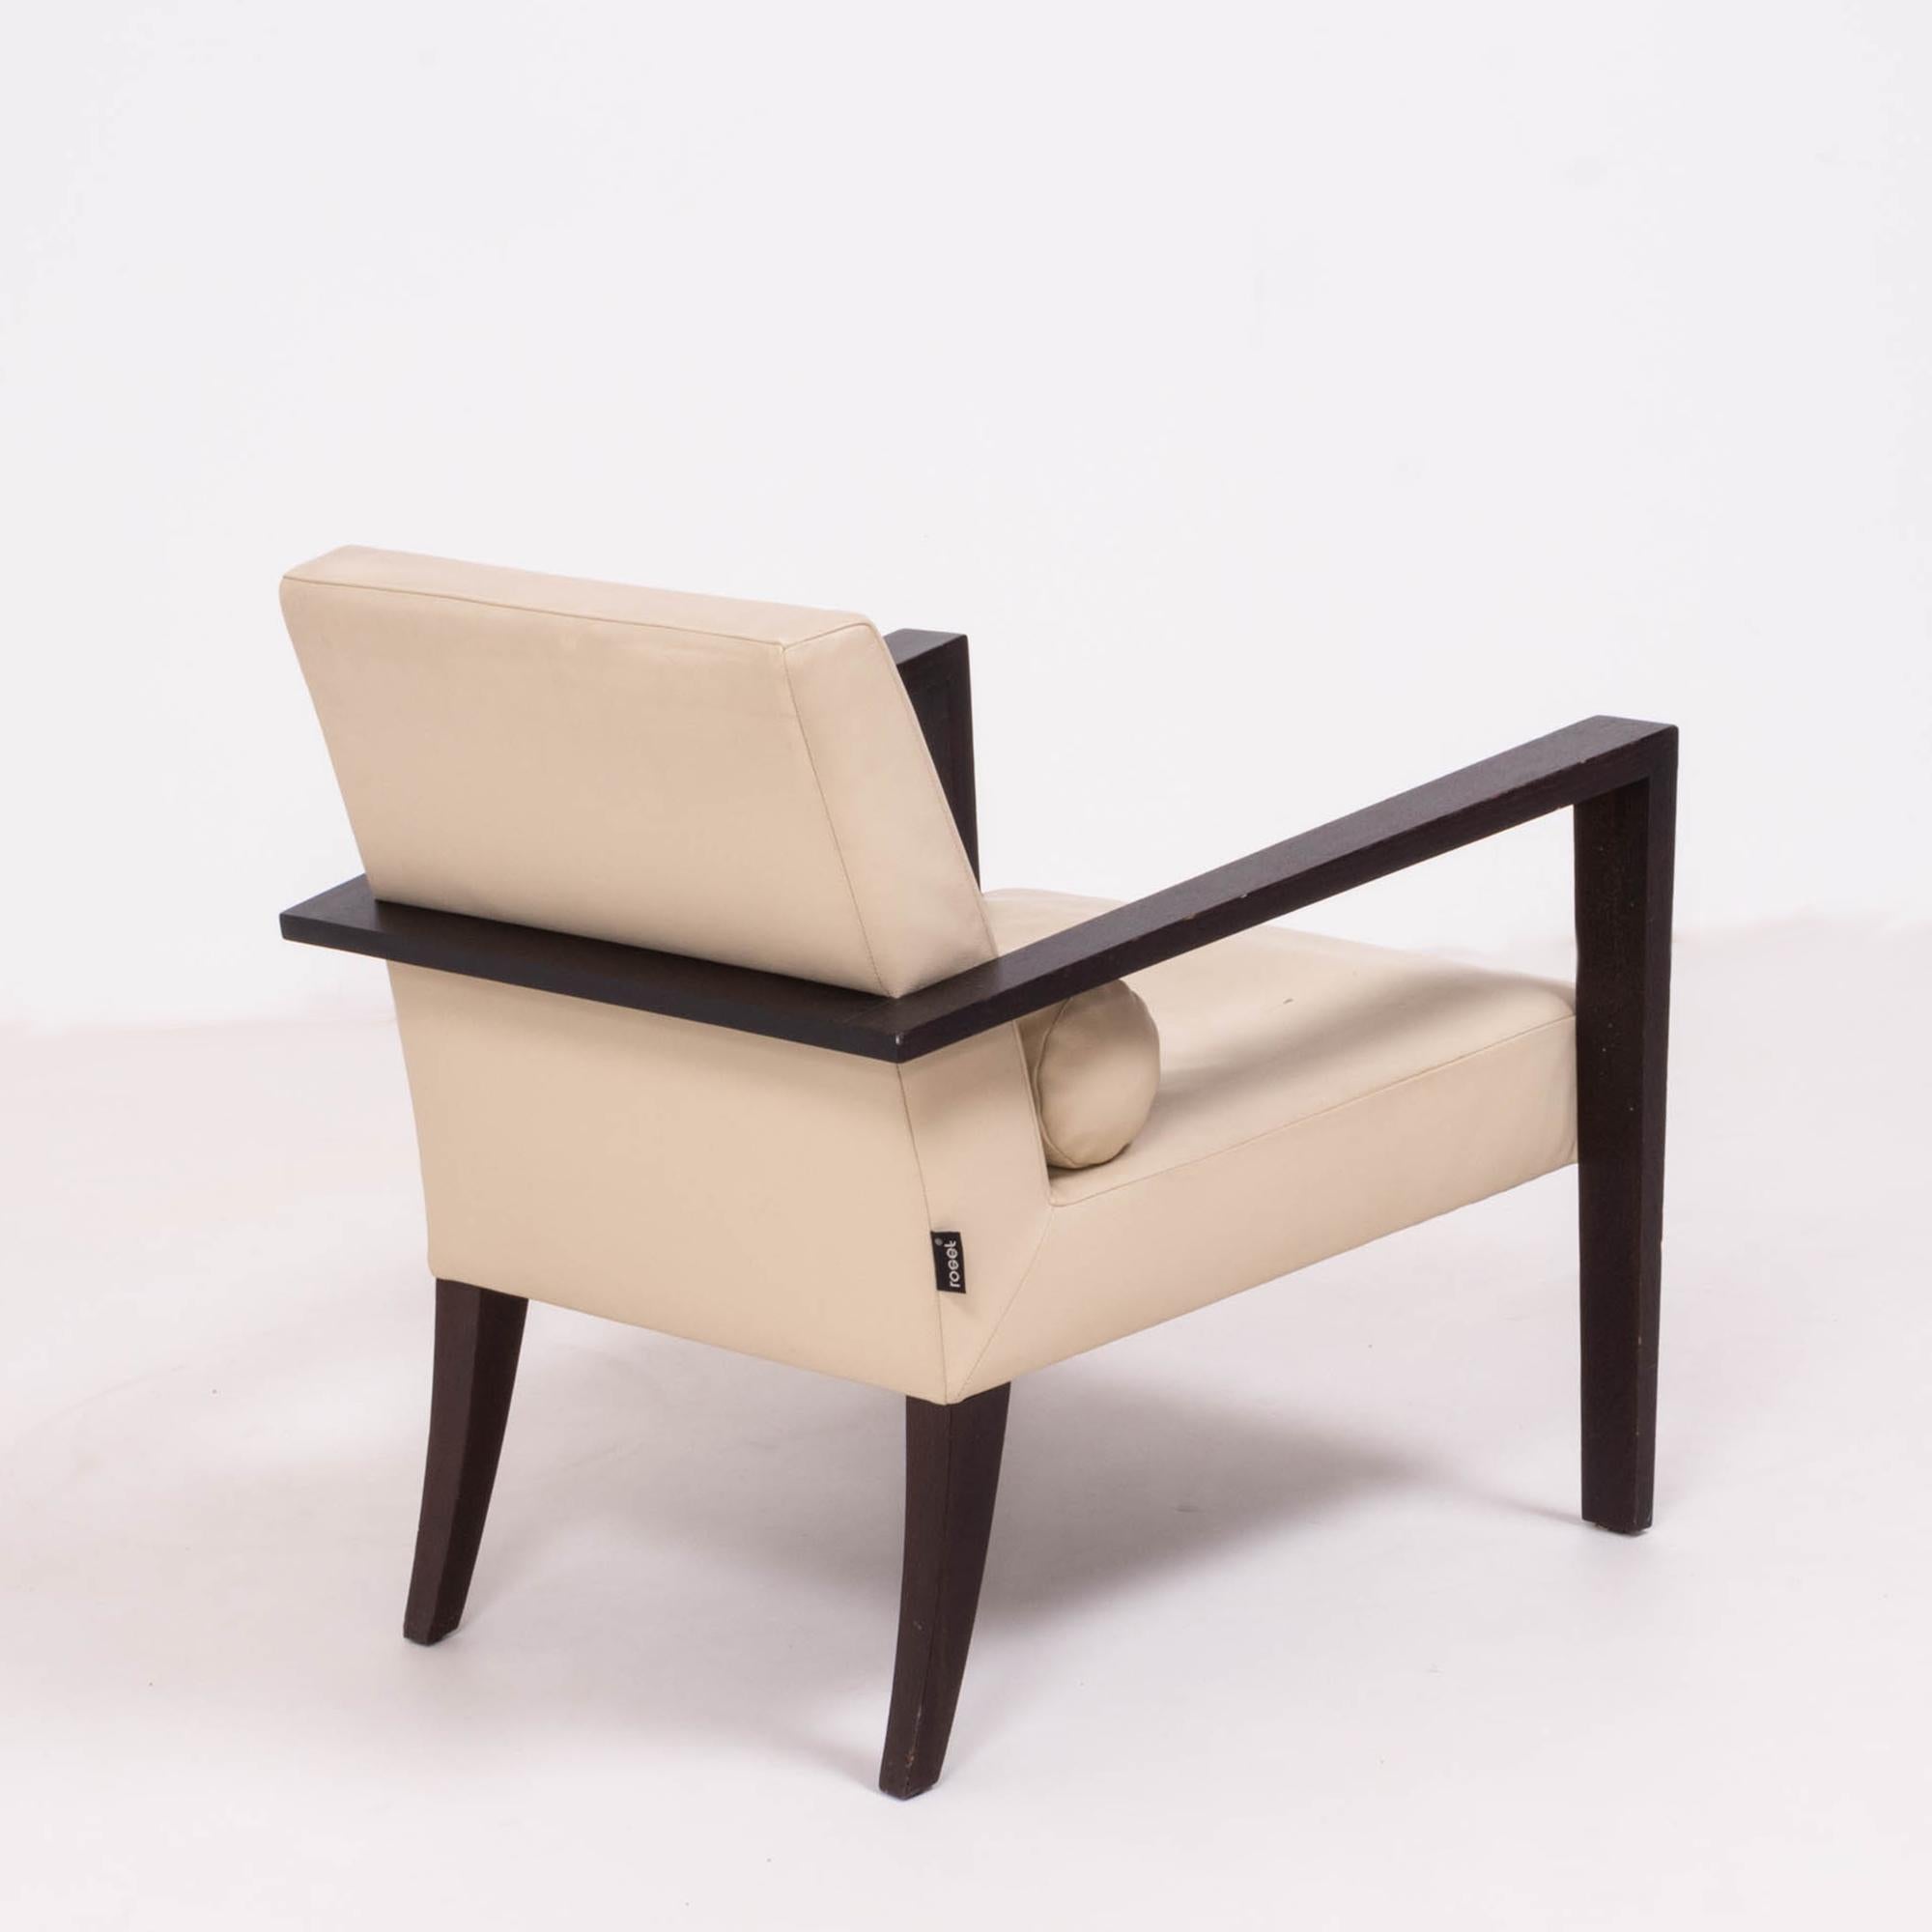 Late 20th Century French Line Accent Chair by Didier Gomez for Ligne Roset